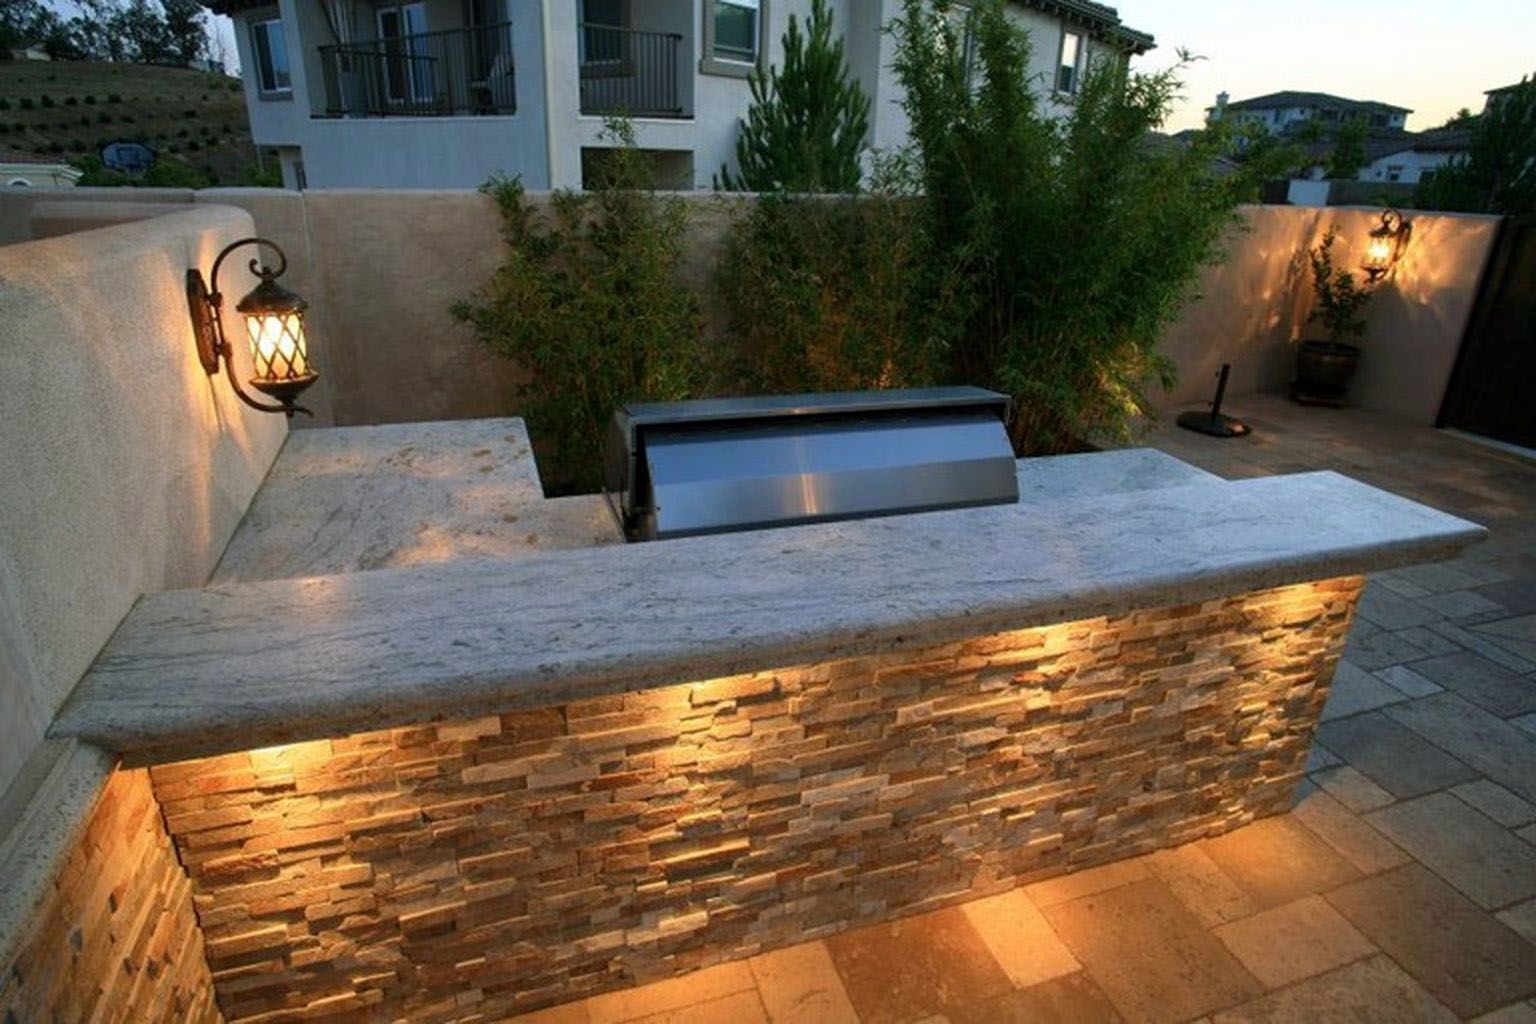 Considerations When Designing An Outdoor Kitchen In Cold Climates